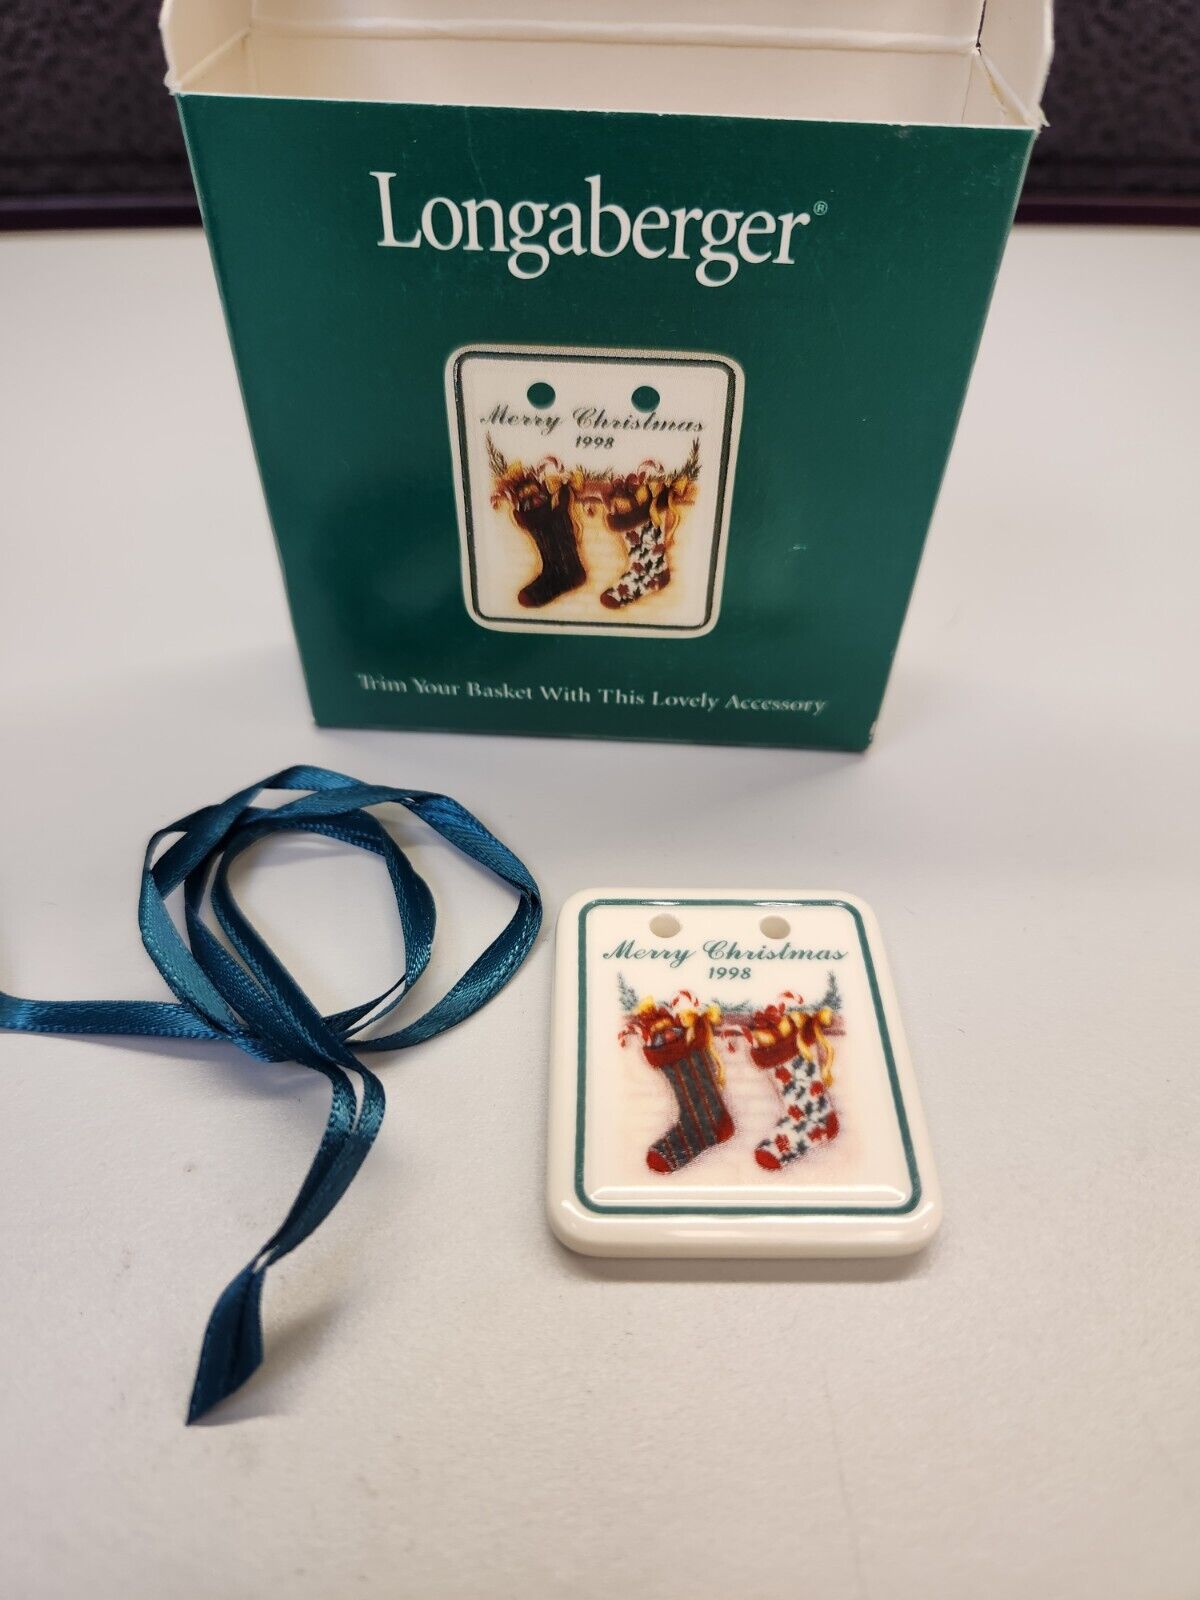 Longaberger 1998 Pottery Christmas Basket Tie On Stockings #33511 NEW In BOX